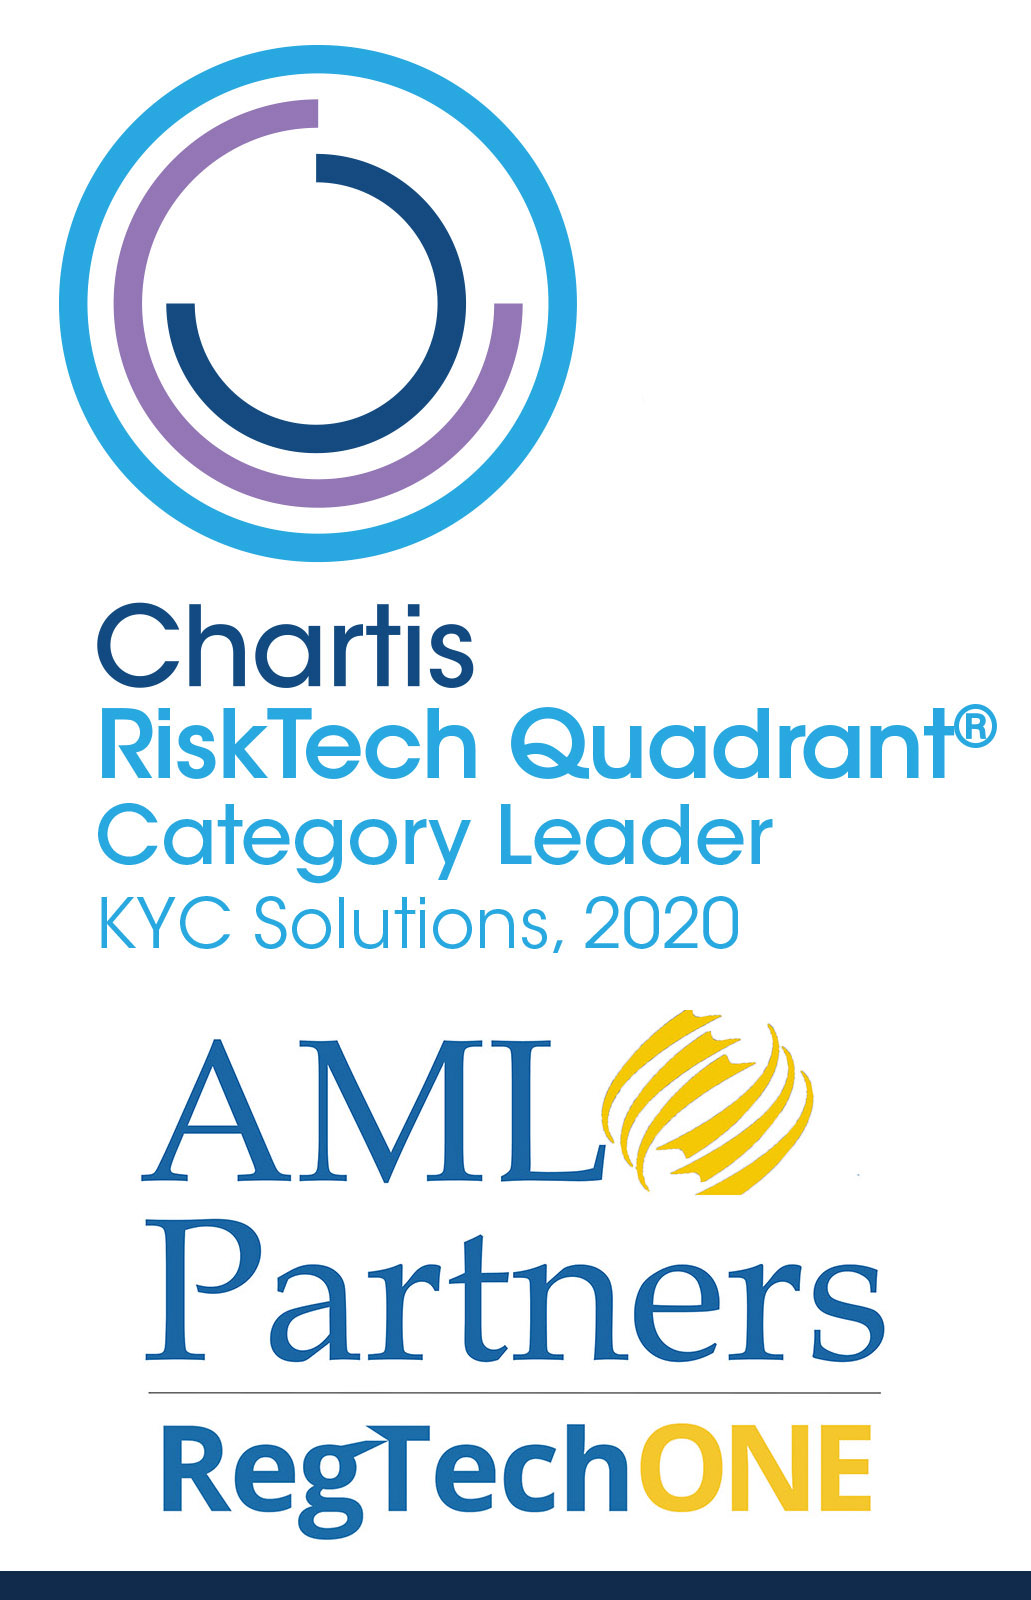 Chartis award for leading KYC Solution--AML Partners and its RegTechONE platform provide exceptional AML software, KYC software, AML solutions, GRC solutions, and KYC solutions.